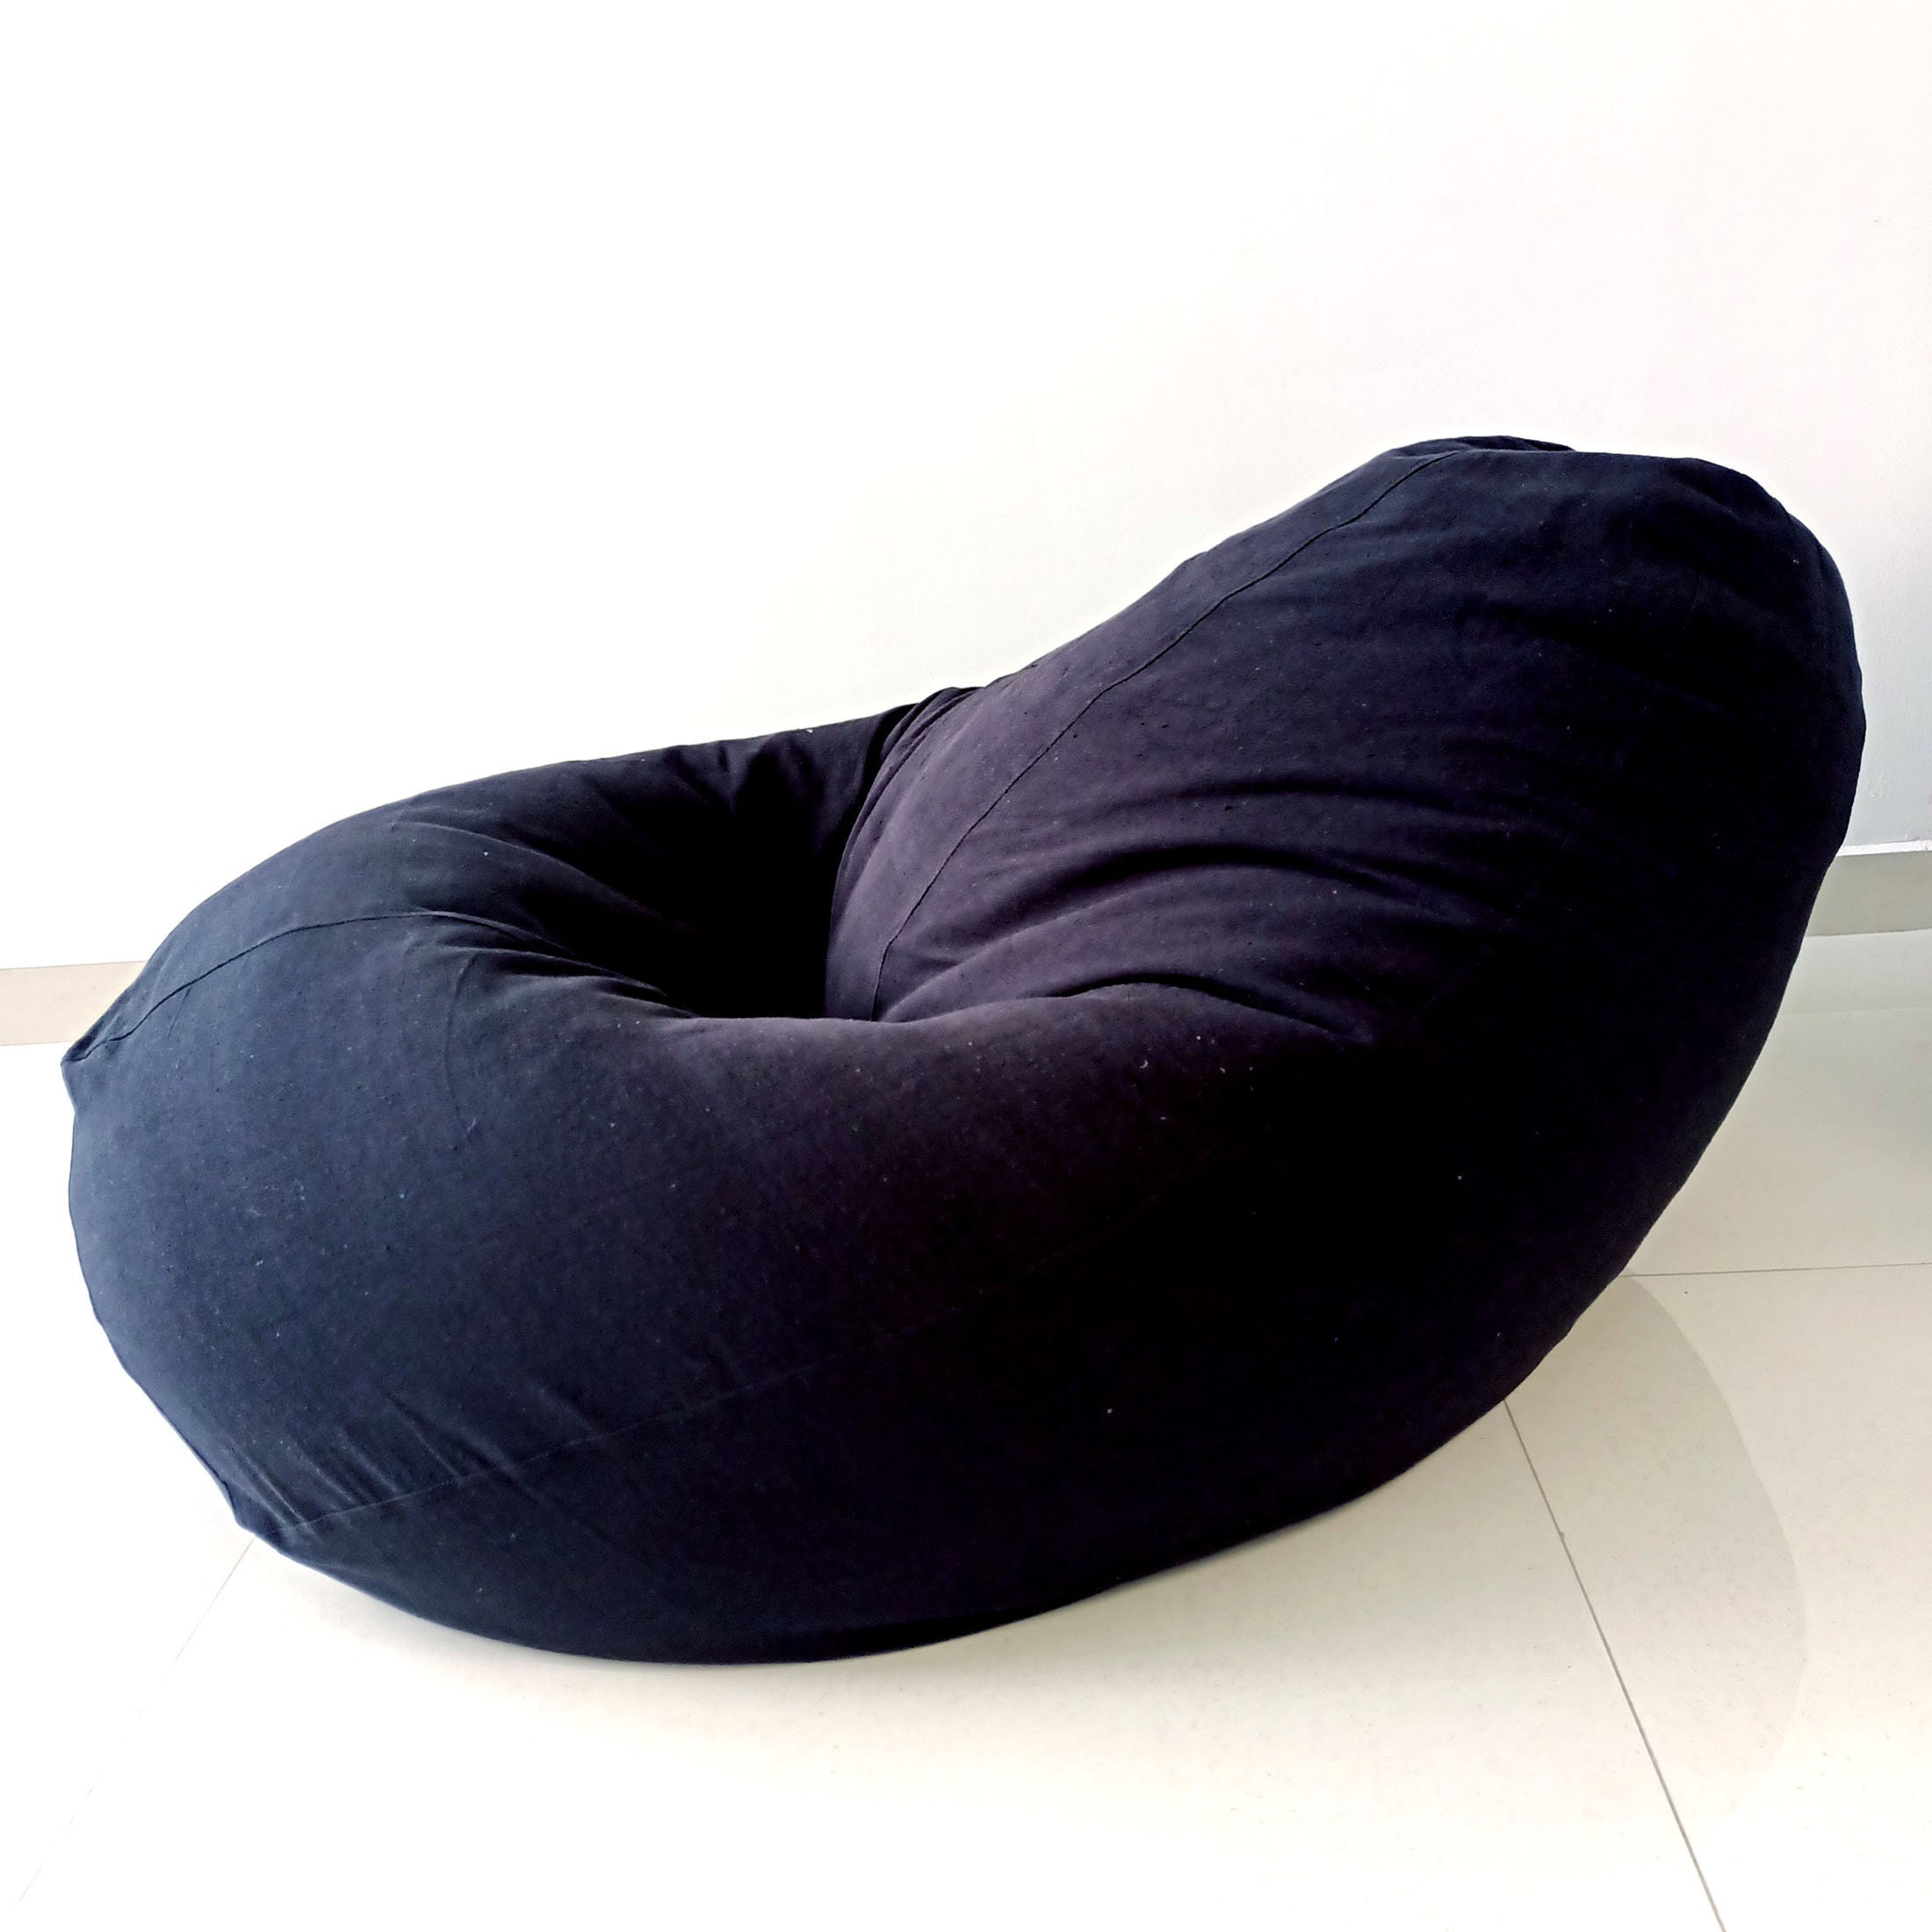 XL Round Black Bean Bag Chair Cover, Black in Handloom Cotton With